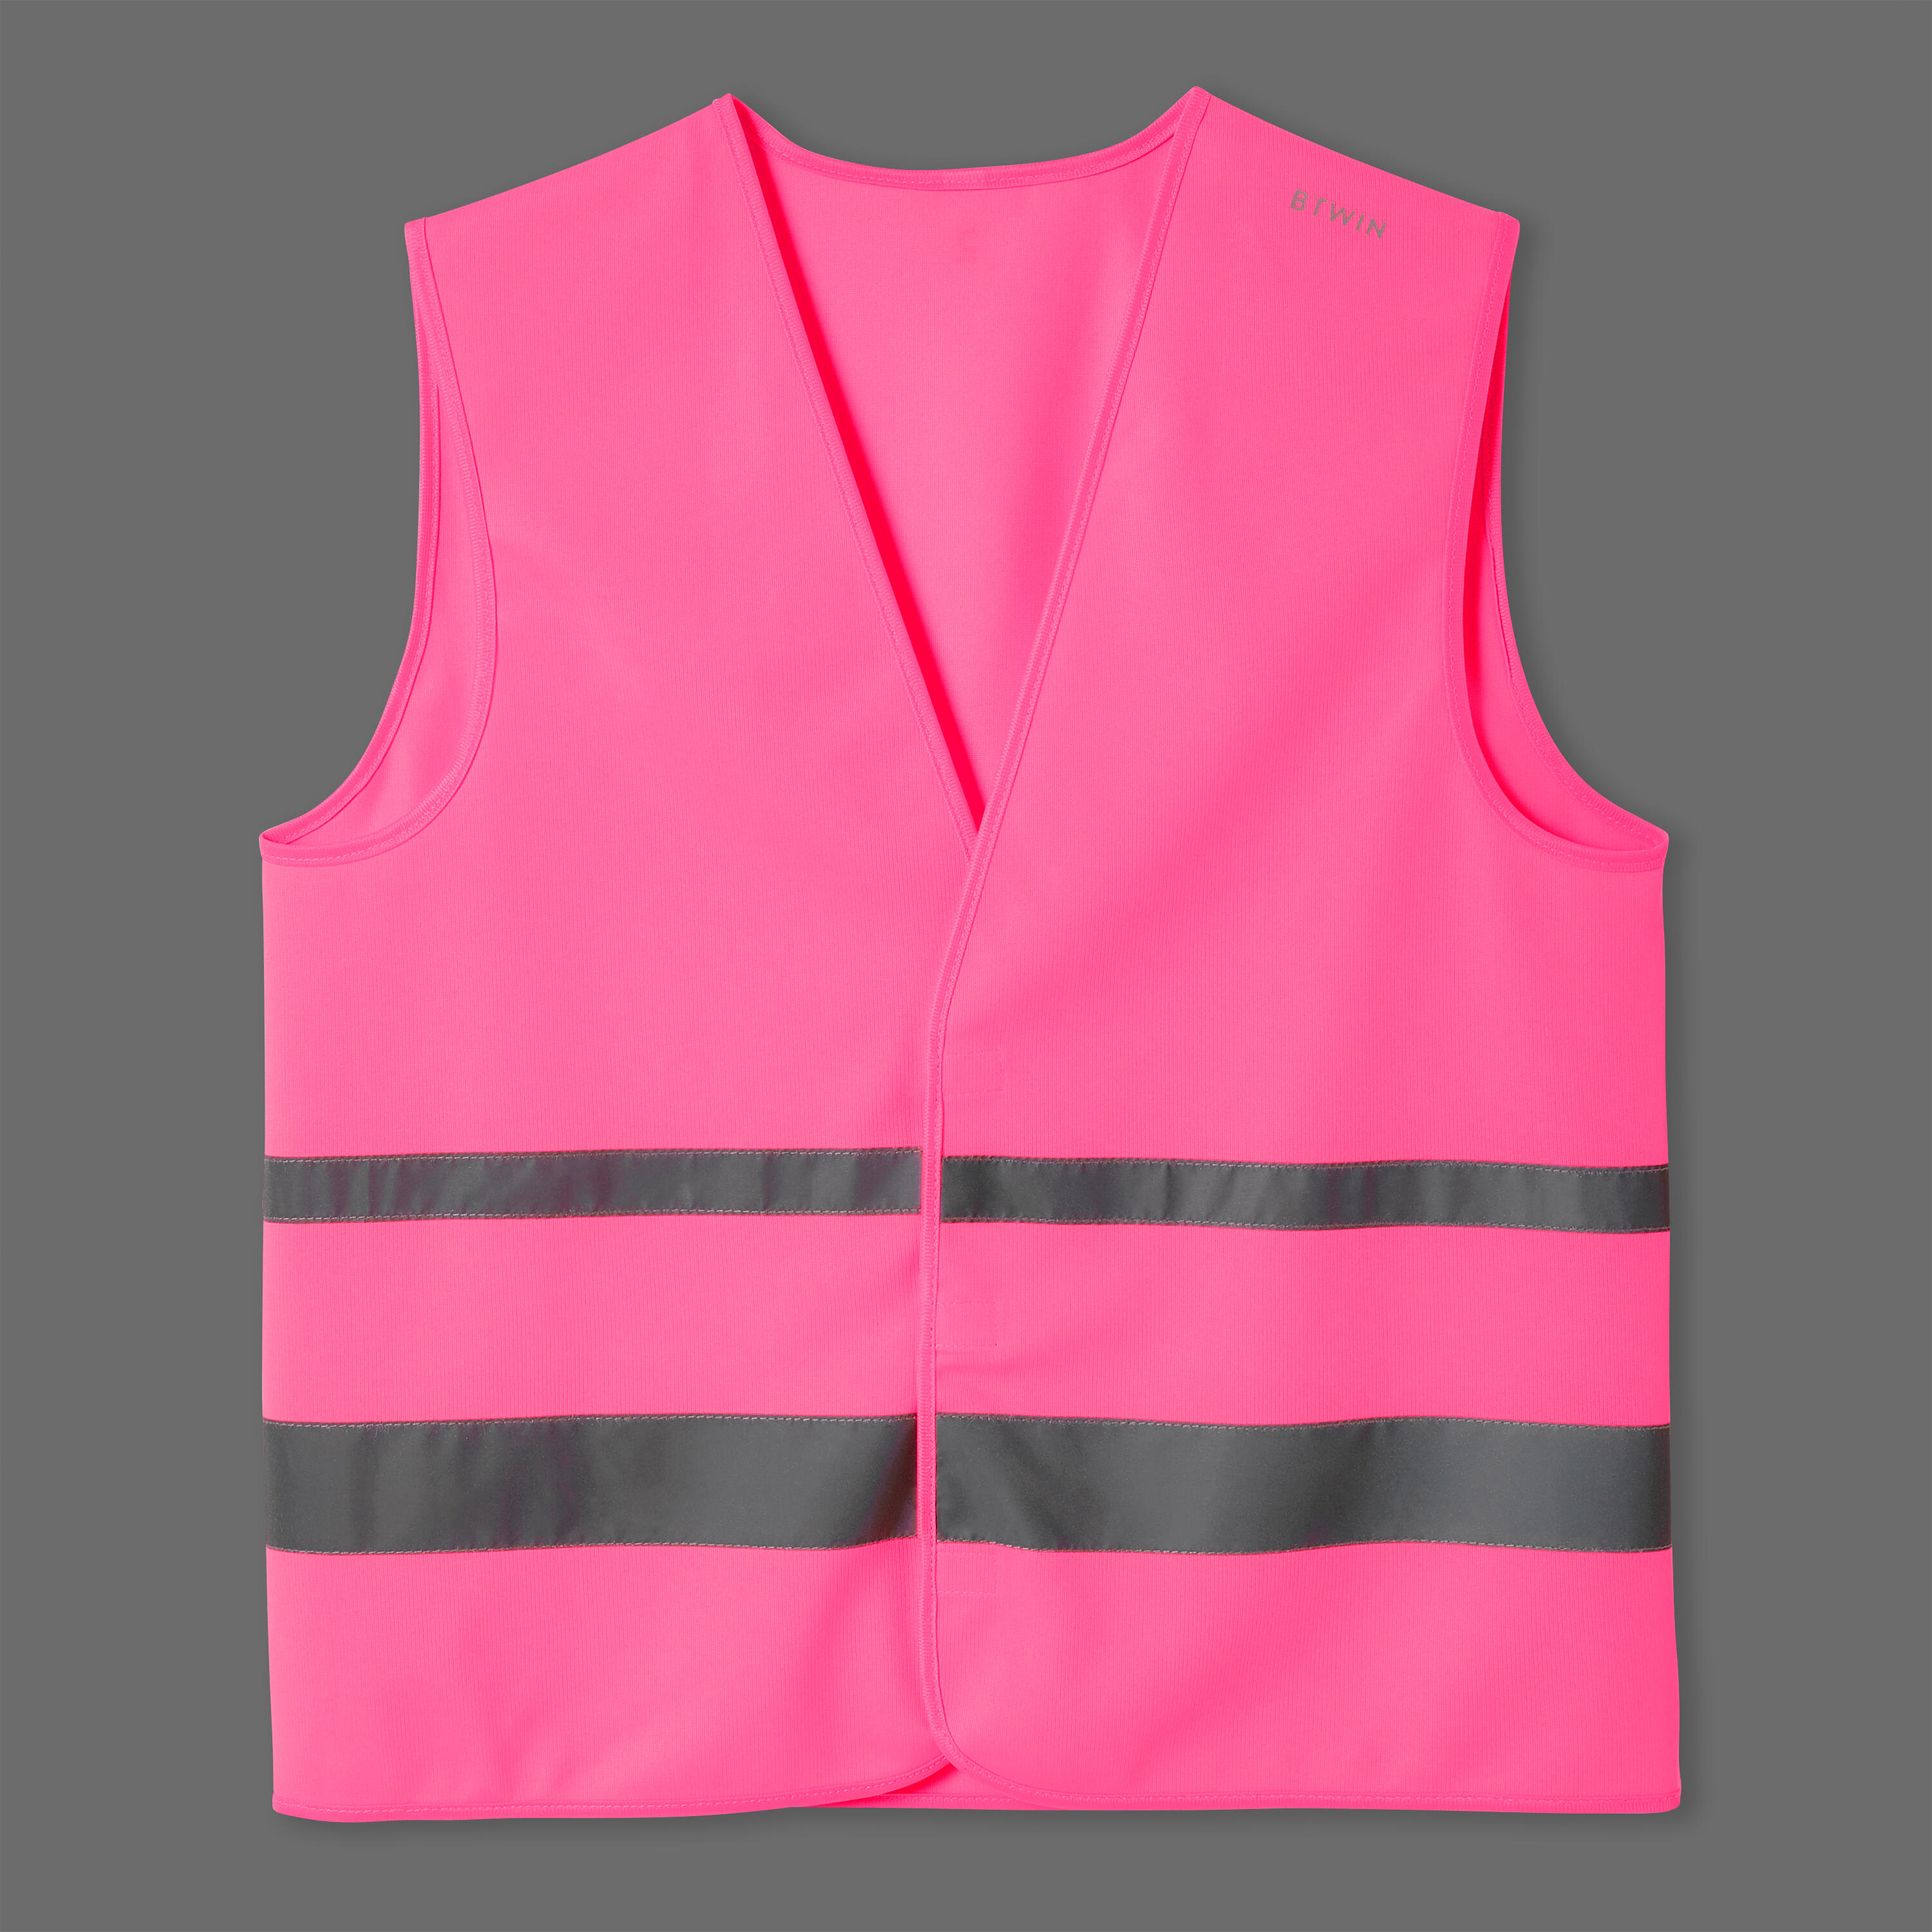 Adult High Visibility Cycling Safety Vest - Neon Pink 3/3